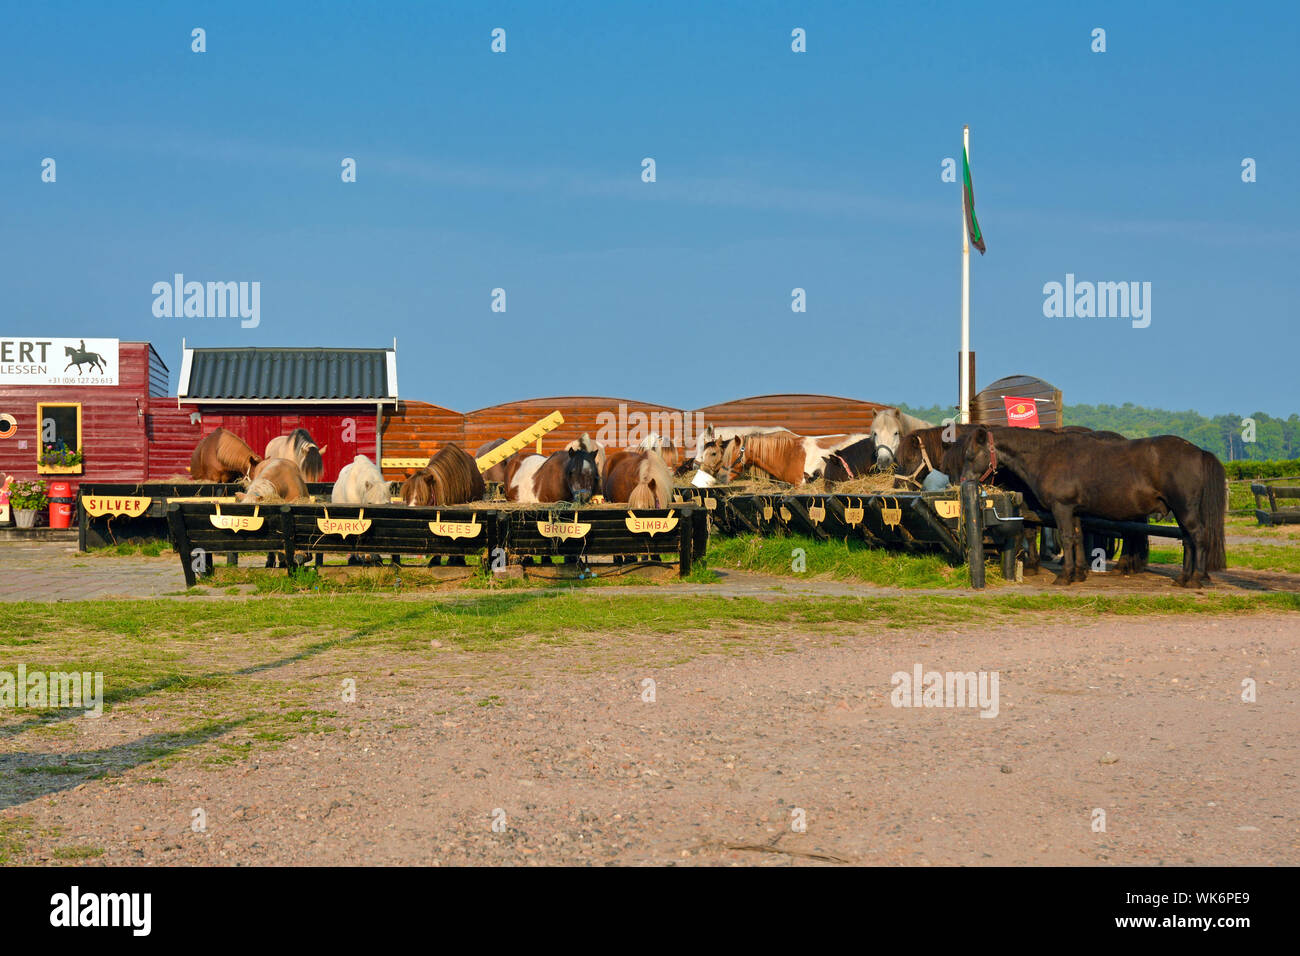 Texel  Netherlands - August 2019: Riding stable for tourists  called 'Manege Kikkert' at morning with horses and ponies lined up for breakfast Stock Photo